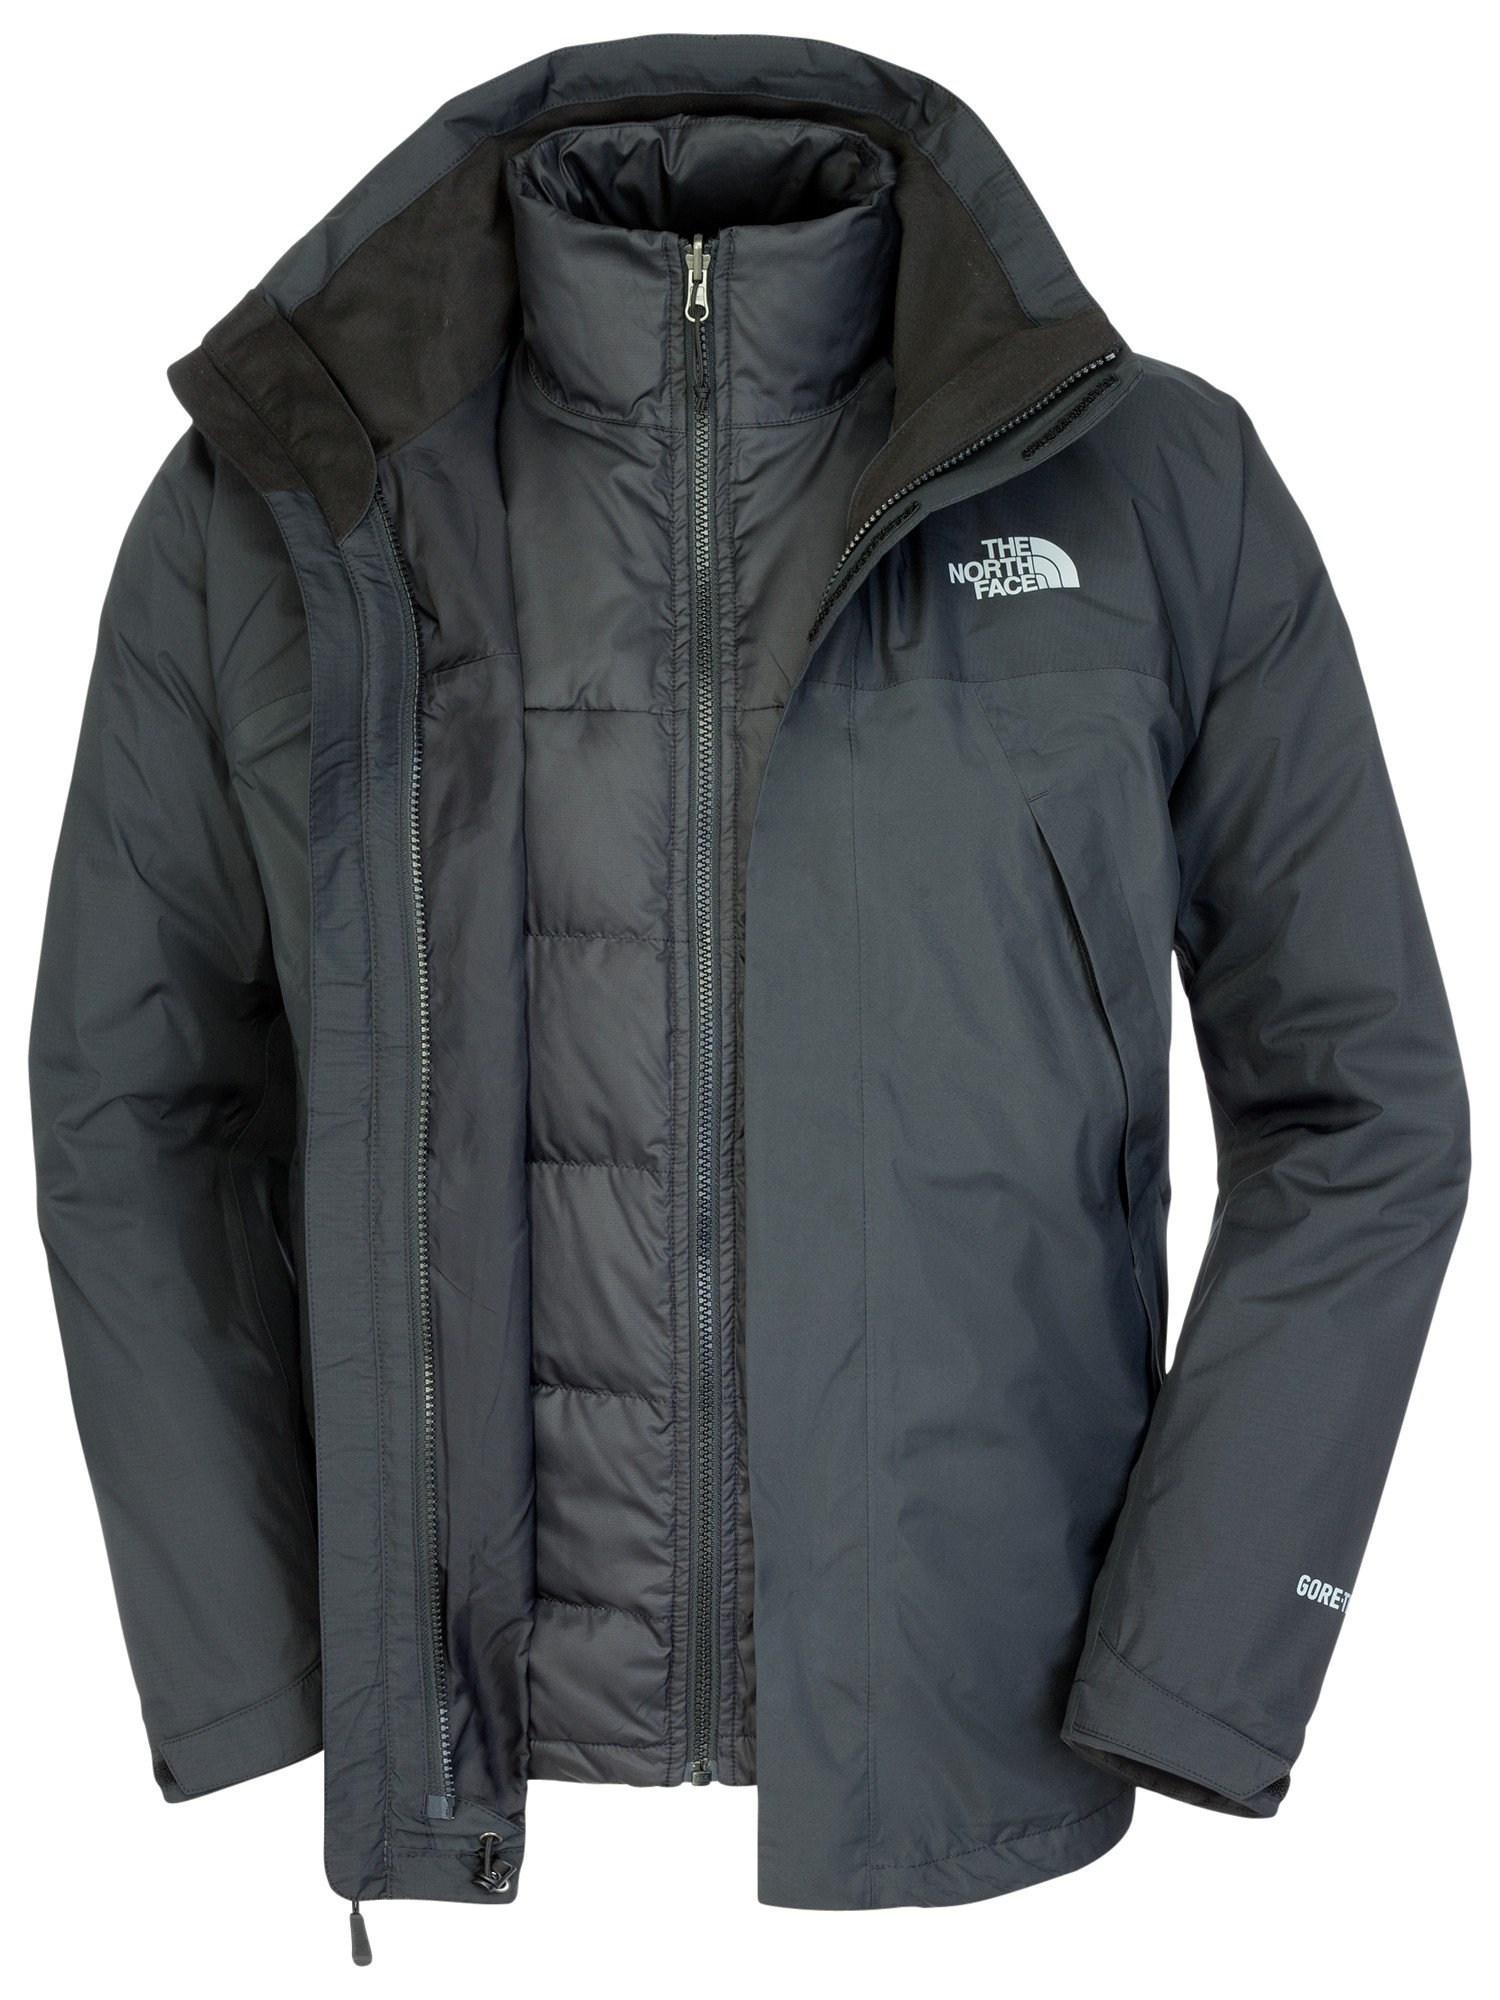 The North Face Goose Mountain Light Triclimate 3-In-1 Jacket in Black for  Men - Lyst